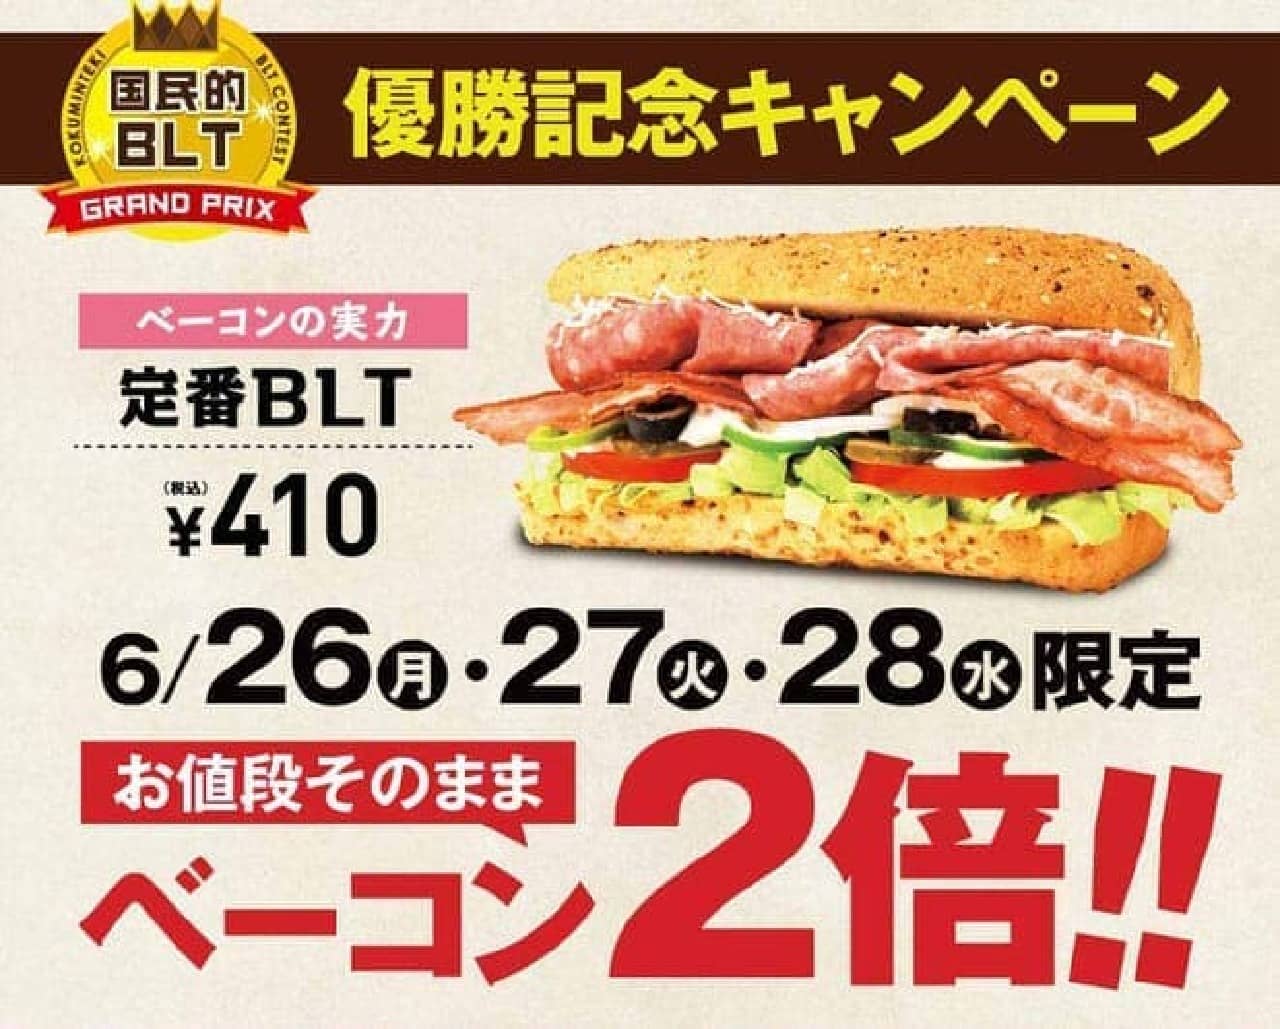 Campaign to double Subway BLT bacon